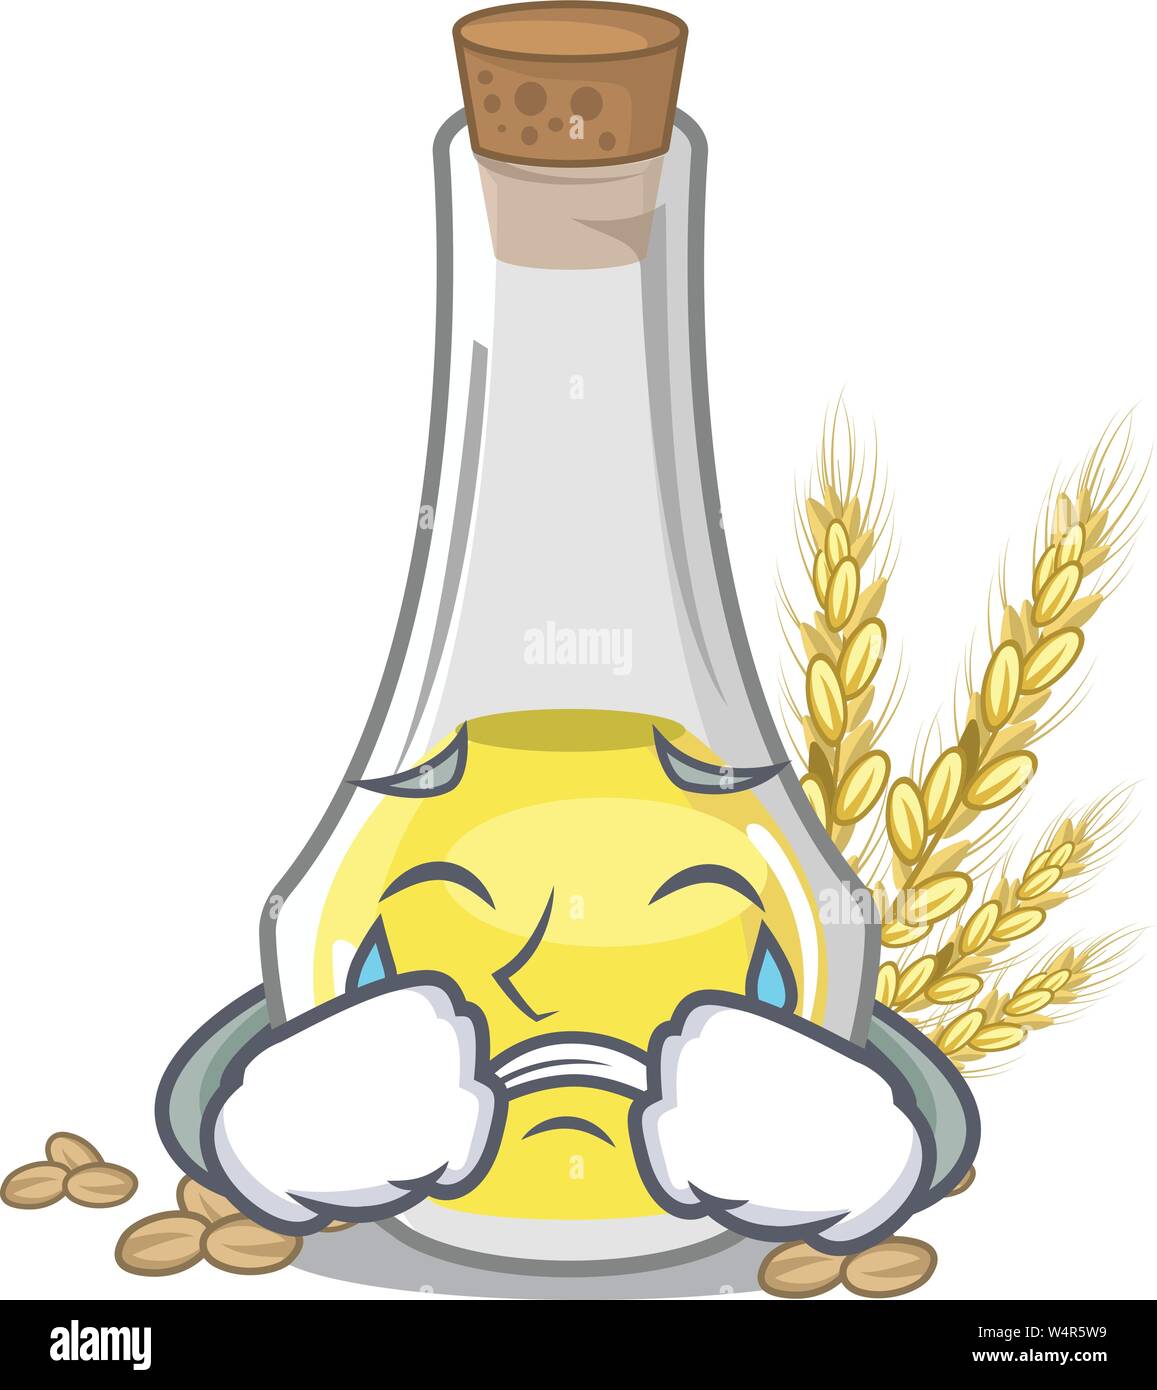 Crying wheat germ oil in a cartoon vector illustration Stock Vector